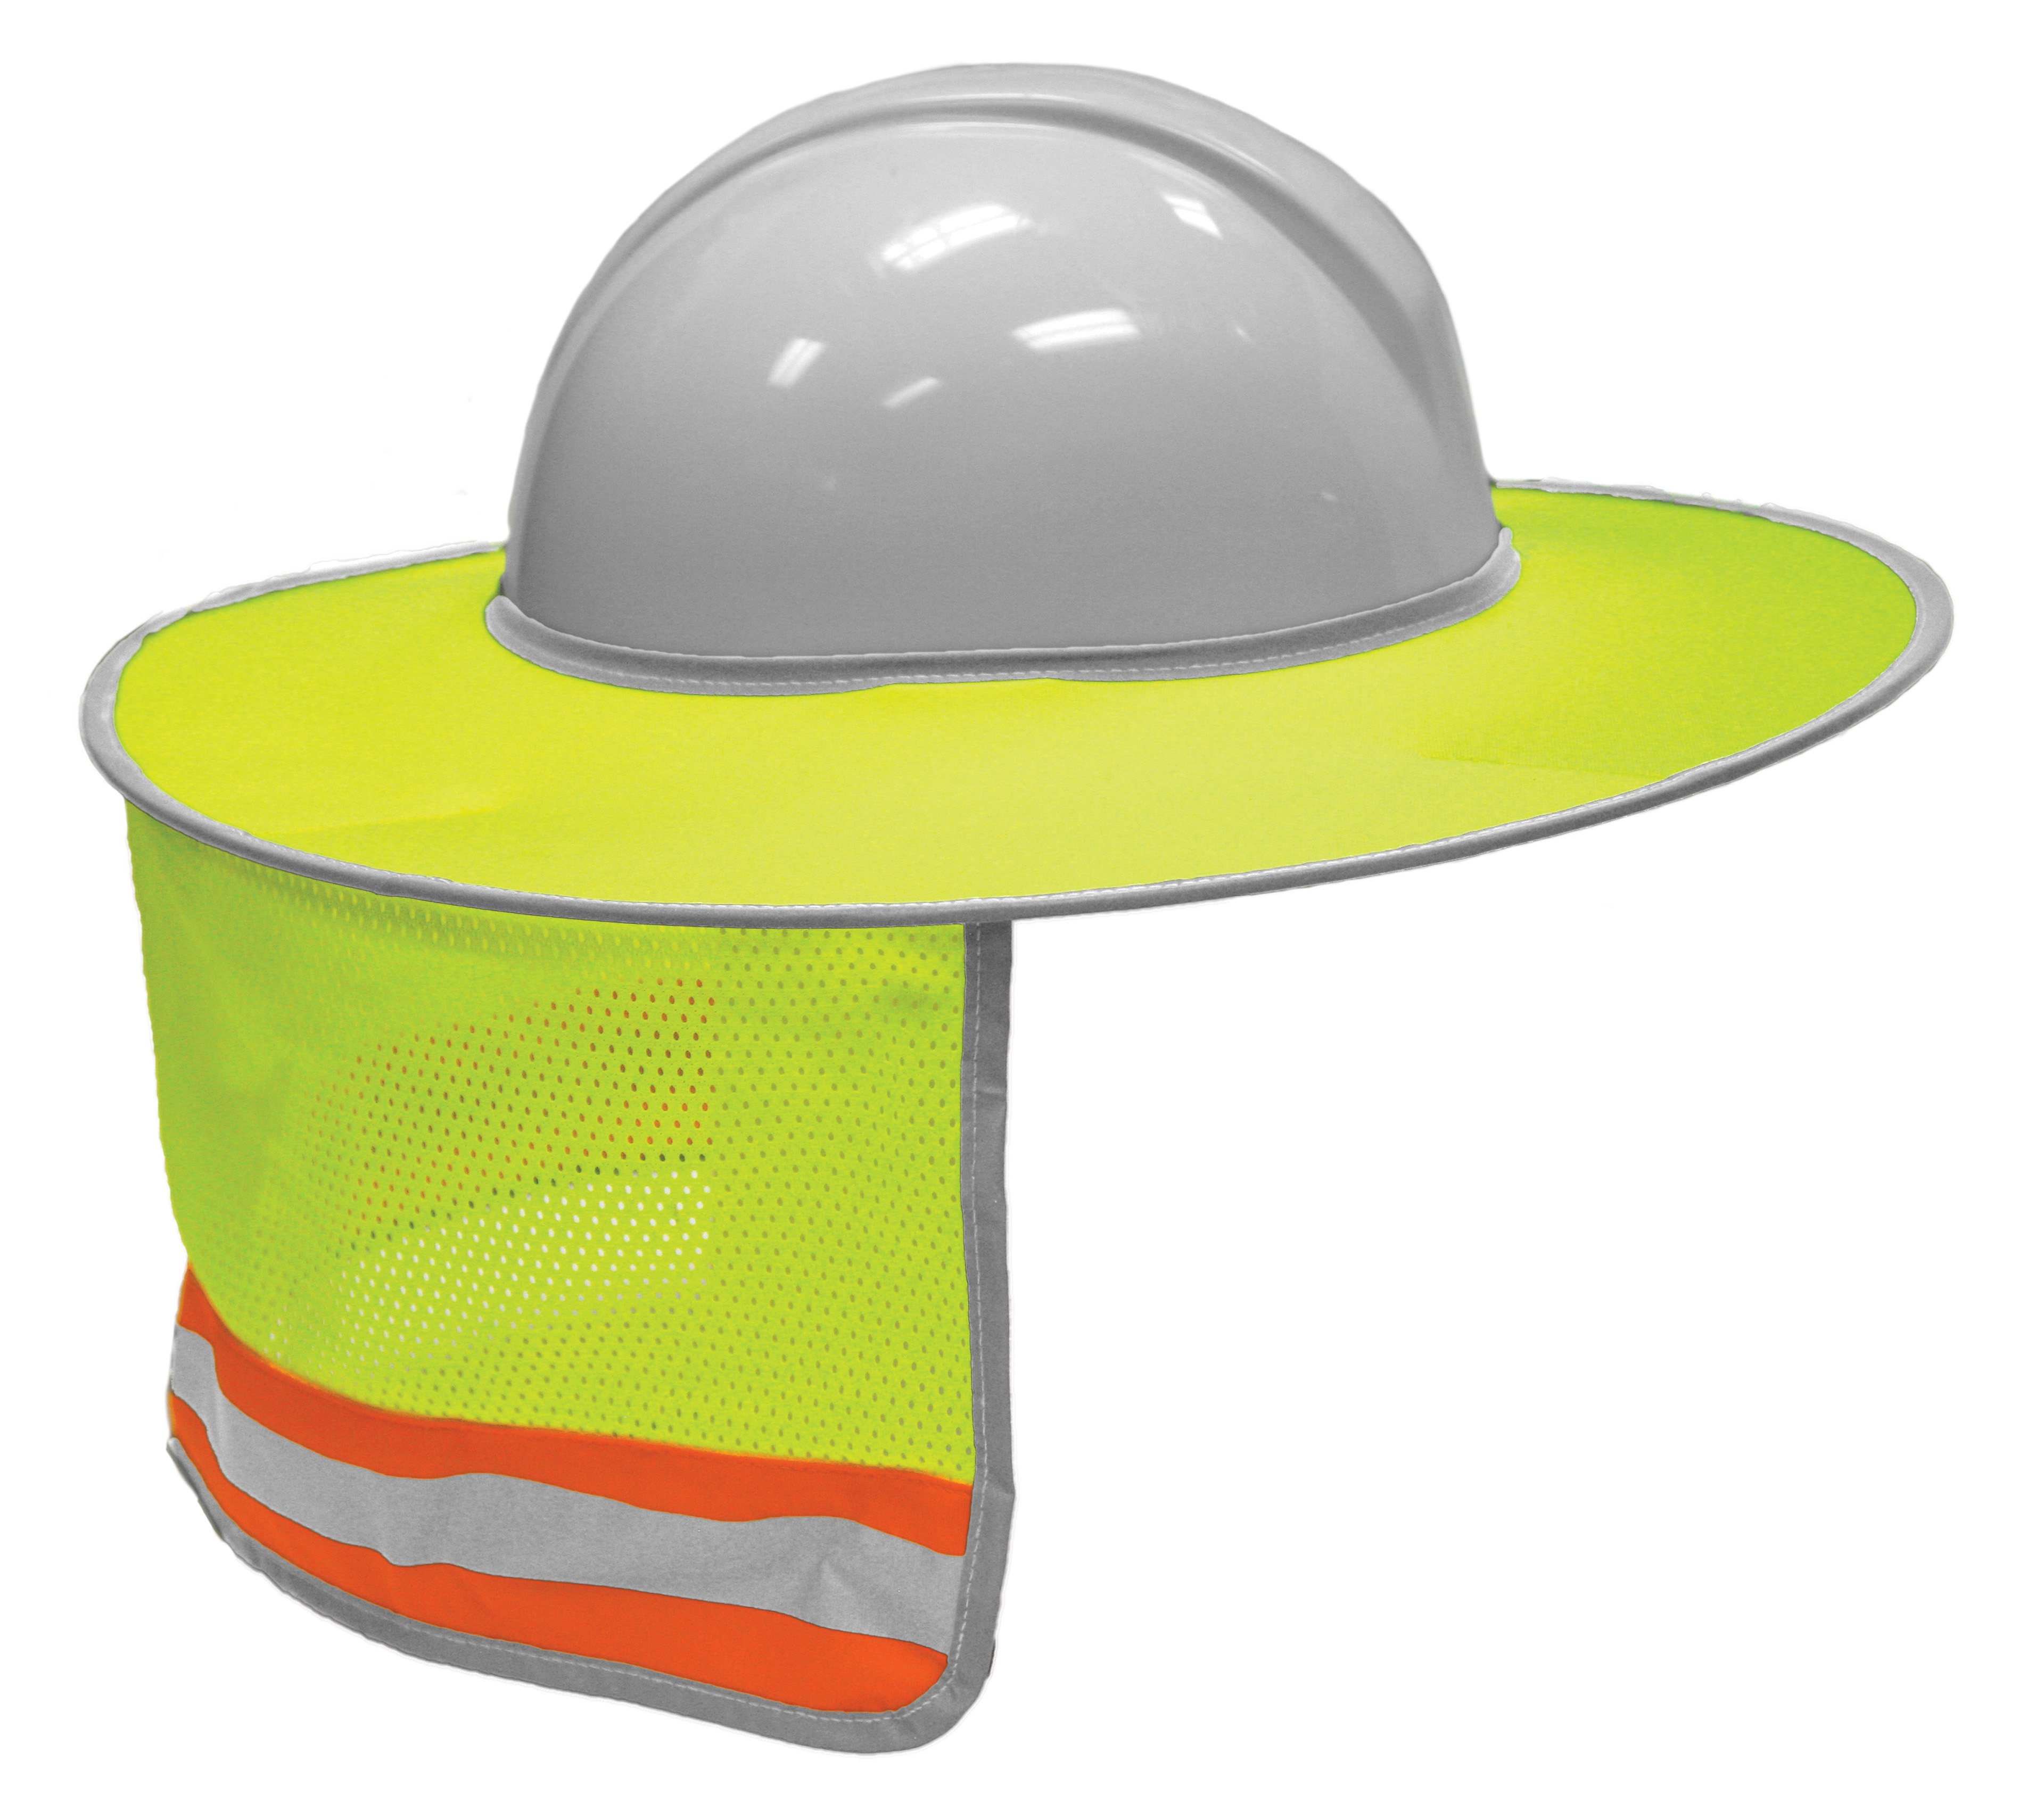 10 Pack Foam Beige Baseball Cap With Peaked Visor Core And Snapback Panel  Replacement Brim For Hard Hats And Liners From Whitedew, $8.03